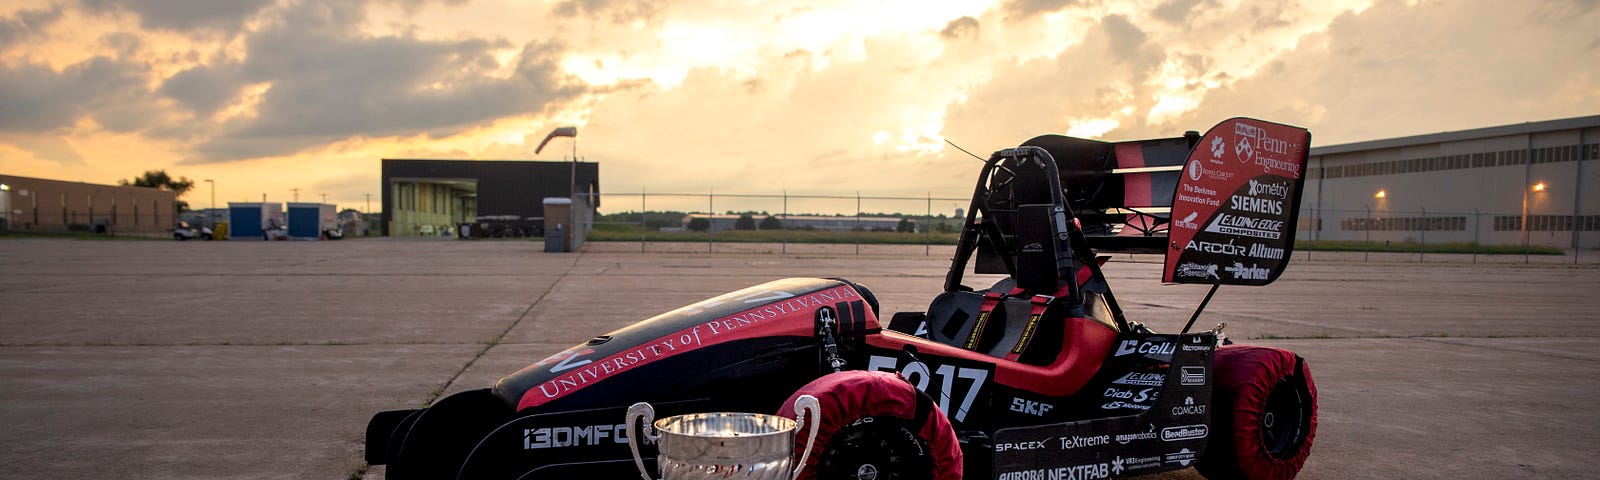 Penn Electric Racing’s REV5 car photographed after the Lincoln FSAE competition, with four trophies in the foreground.